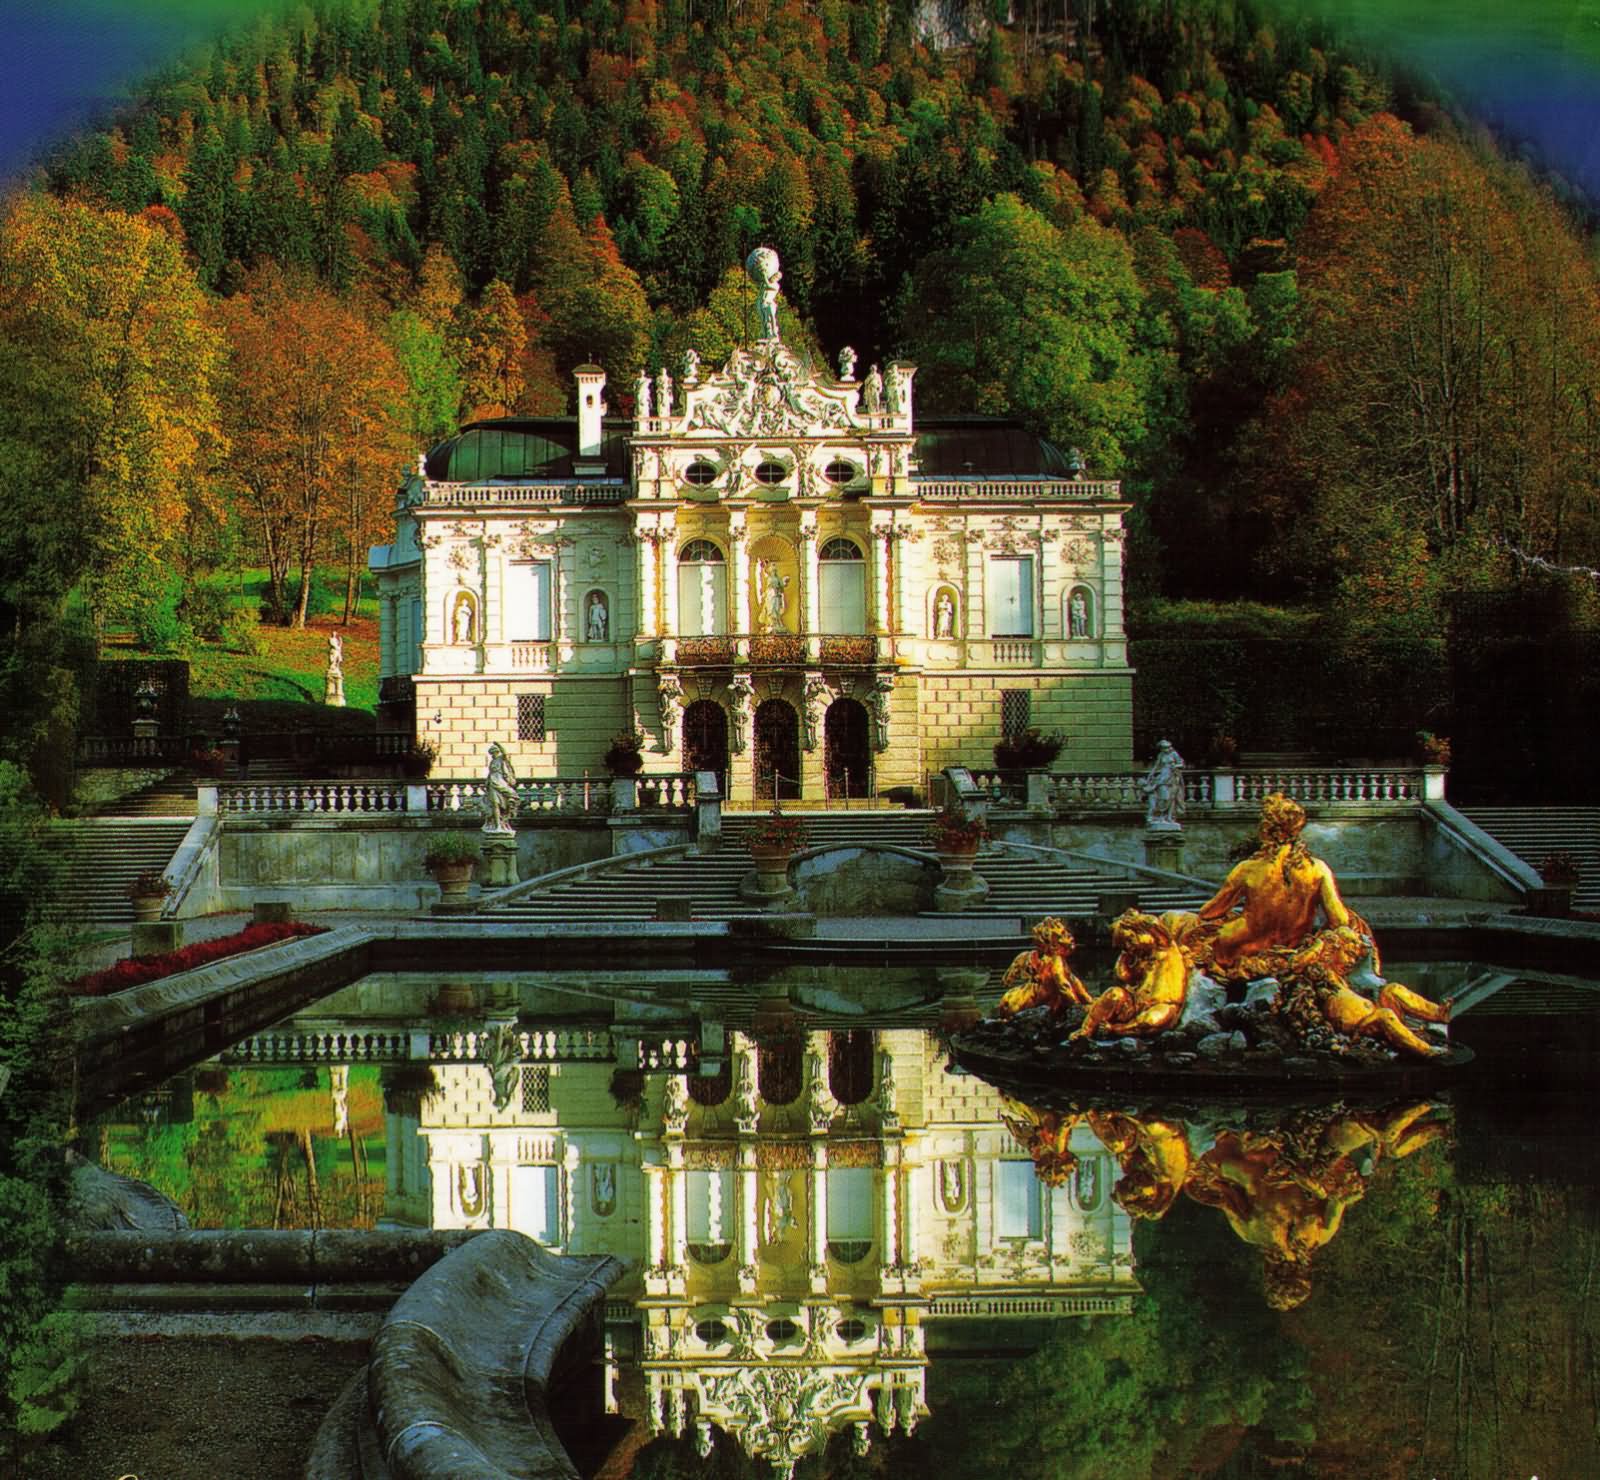 Water Reflection Of The Linderhof Palace